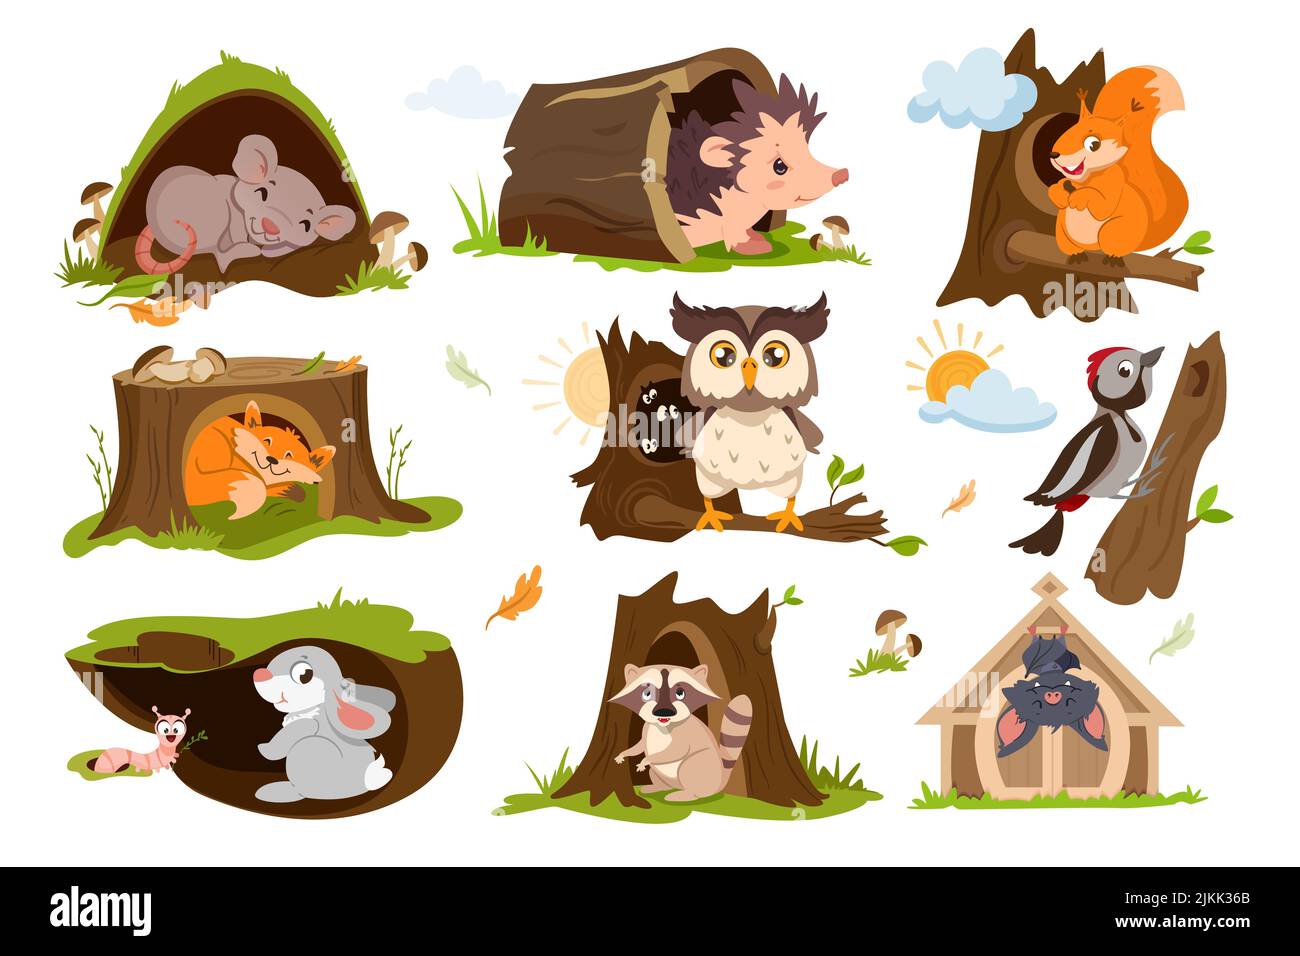 Set of forest animals sleep or hibernate in tree hole houses. Woodland burrows with cute fox, squirrel, owl, raccoon, hare and hedgehog. Woodpecker on a branch with hollow flat vector illustration. Stock Vector